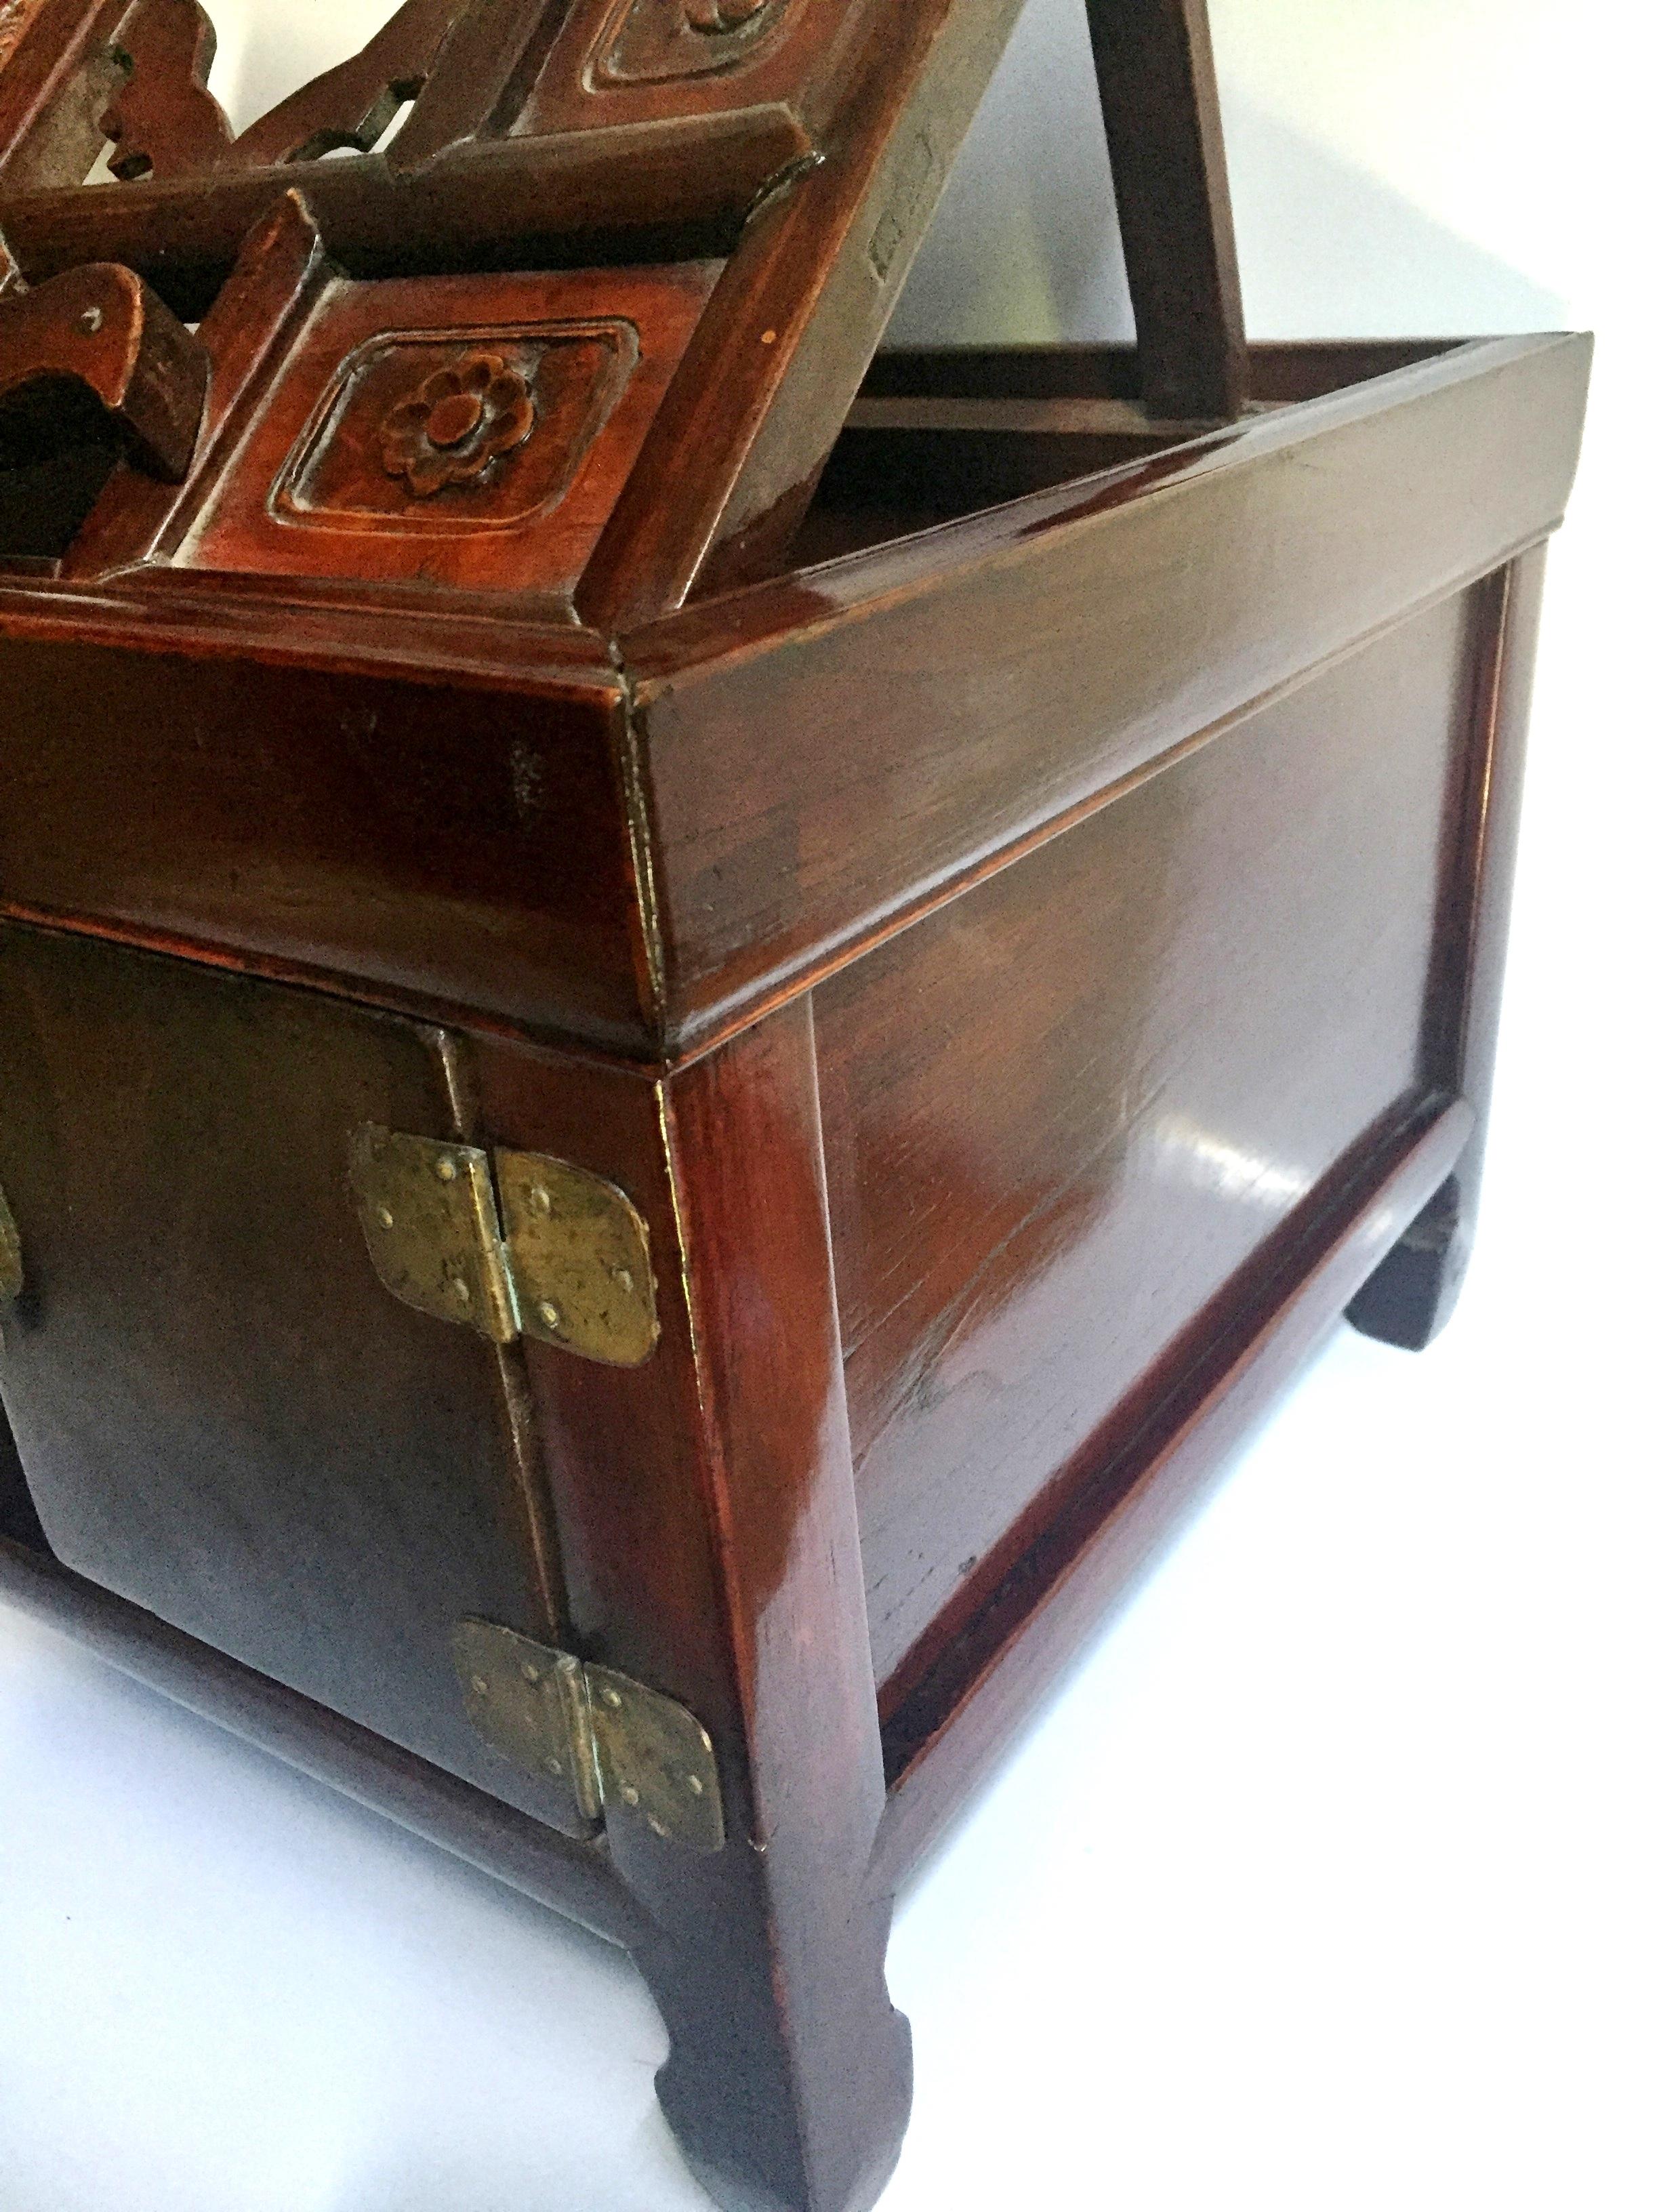 Antique Asian Jewelry Box, Makeup Box, Solid Elm Wood, Convertible 1